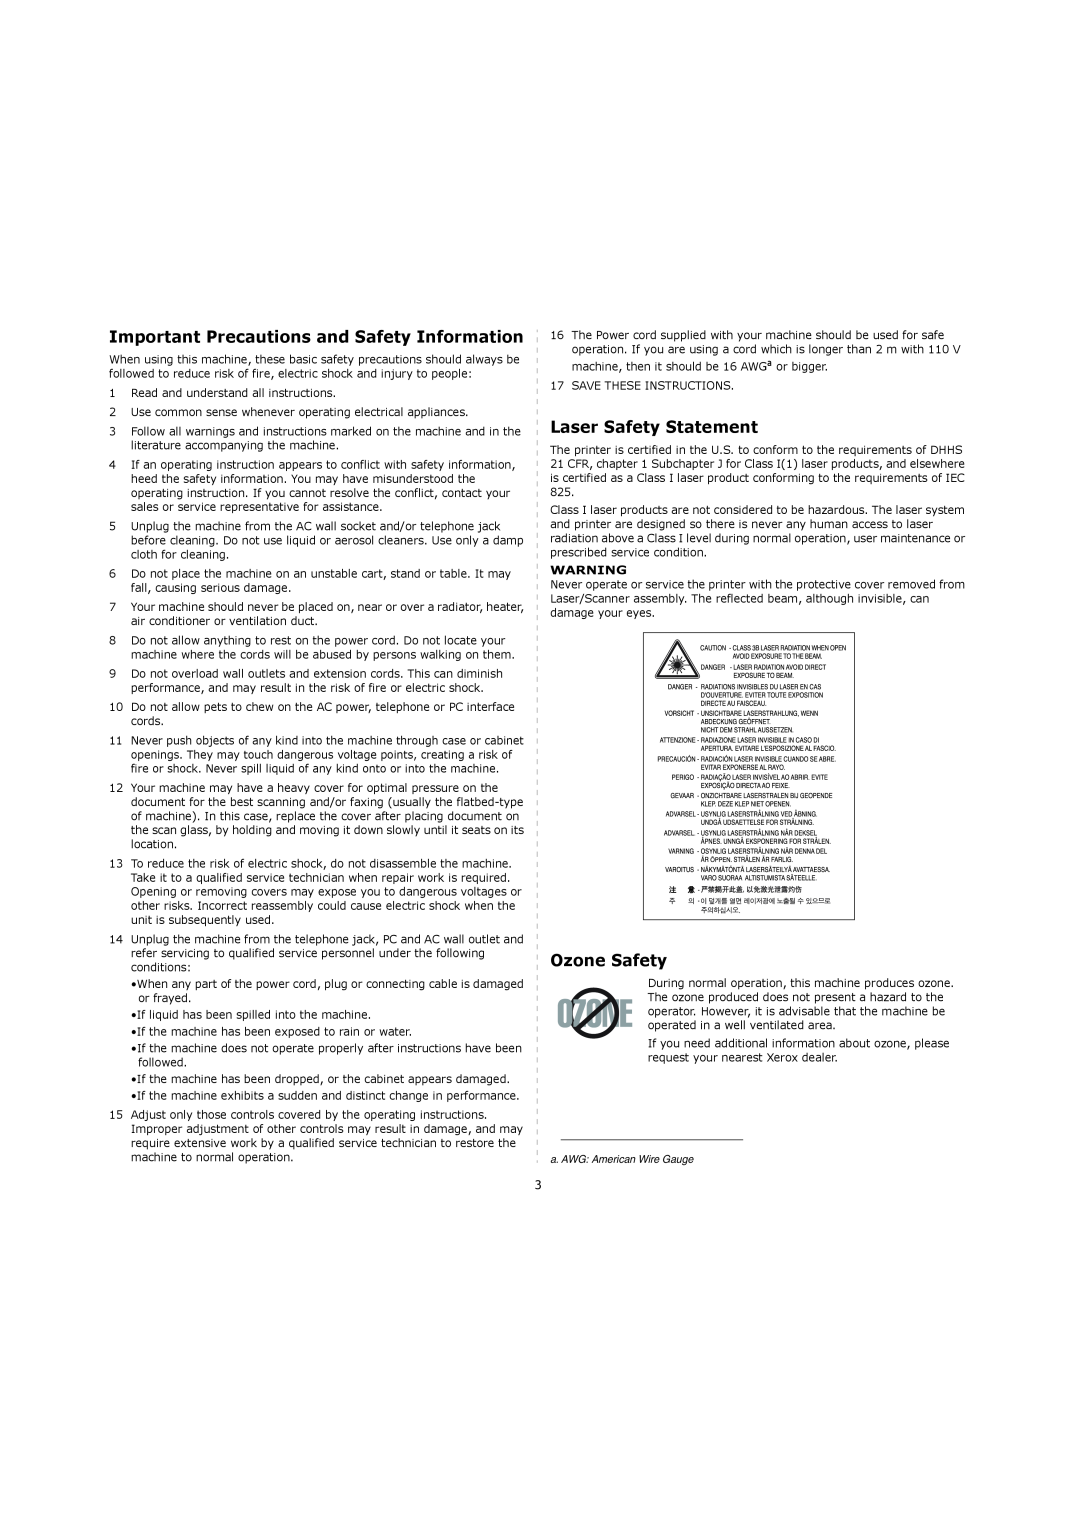 Xerox 3119 manual Important Precautions and Safety Information, Laser Safety Statement, Ozone Safety 